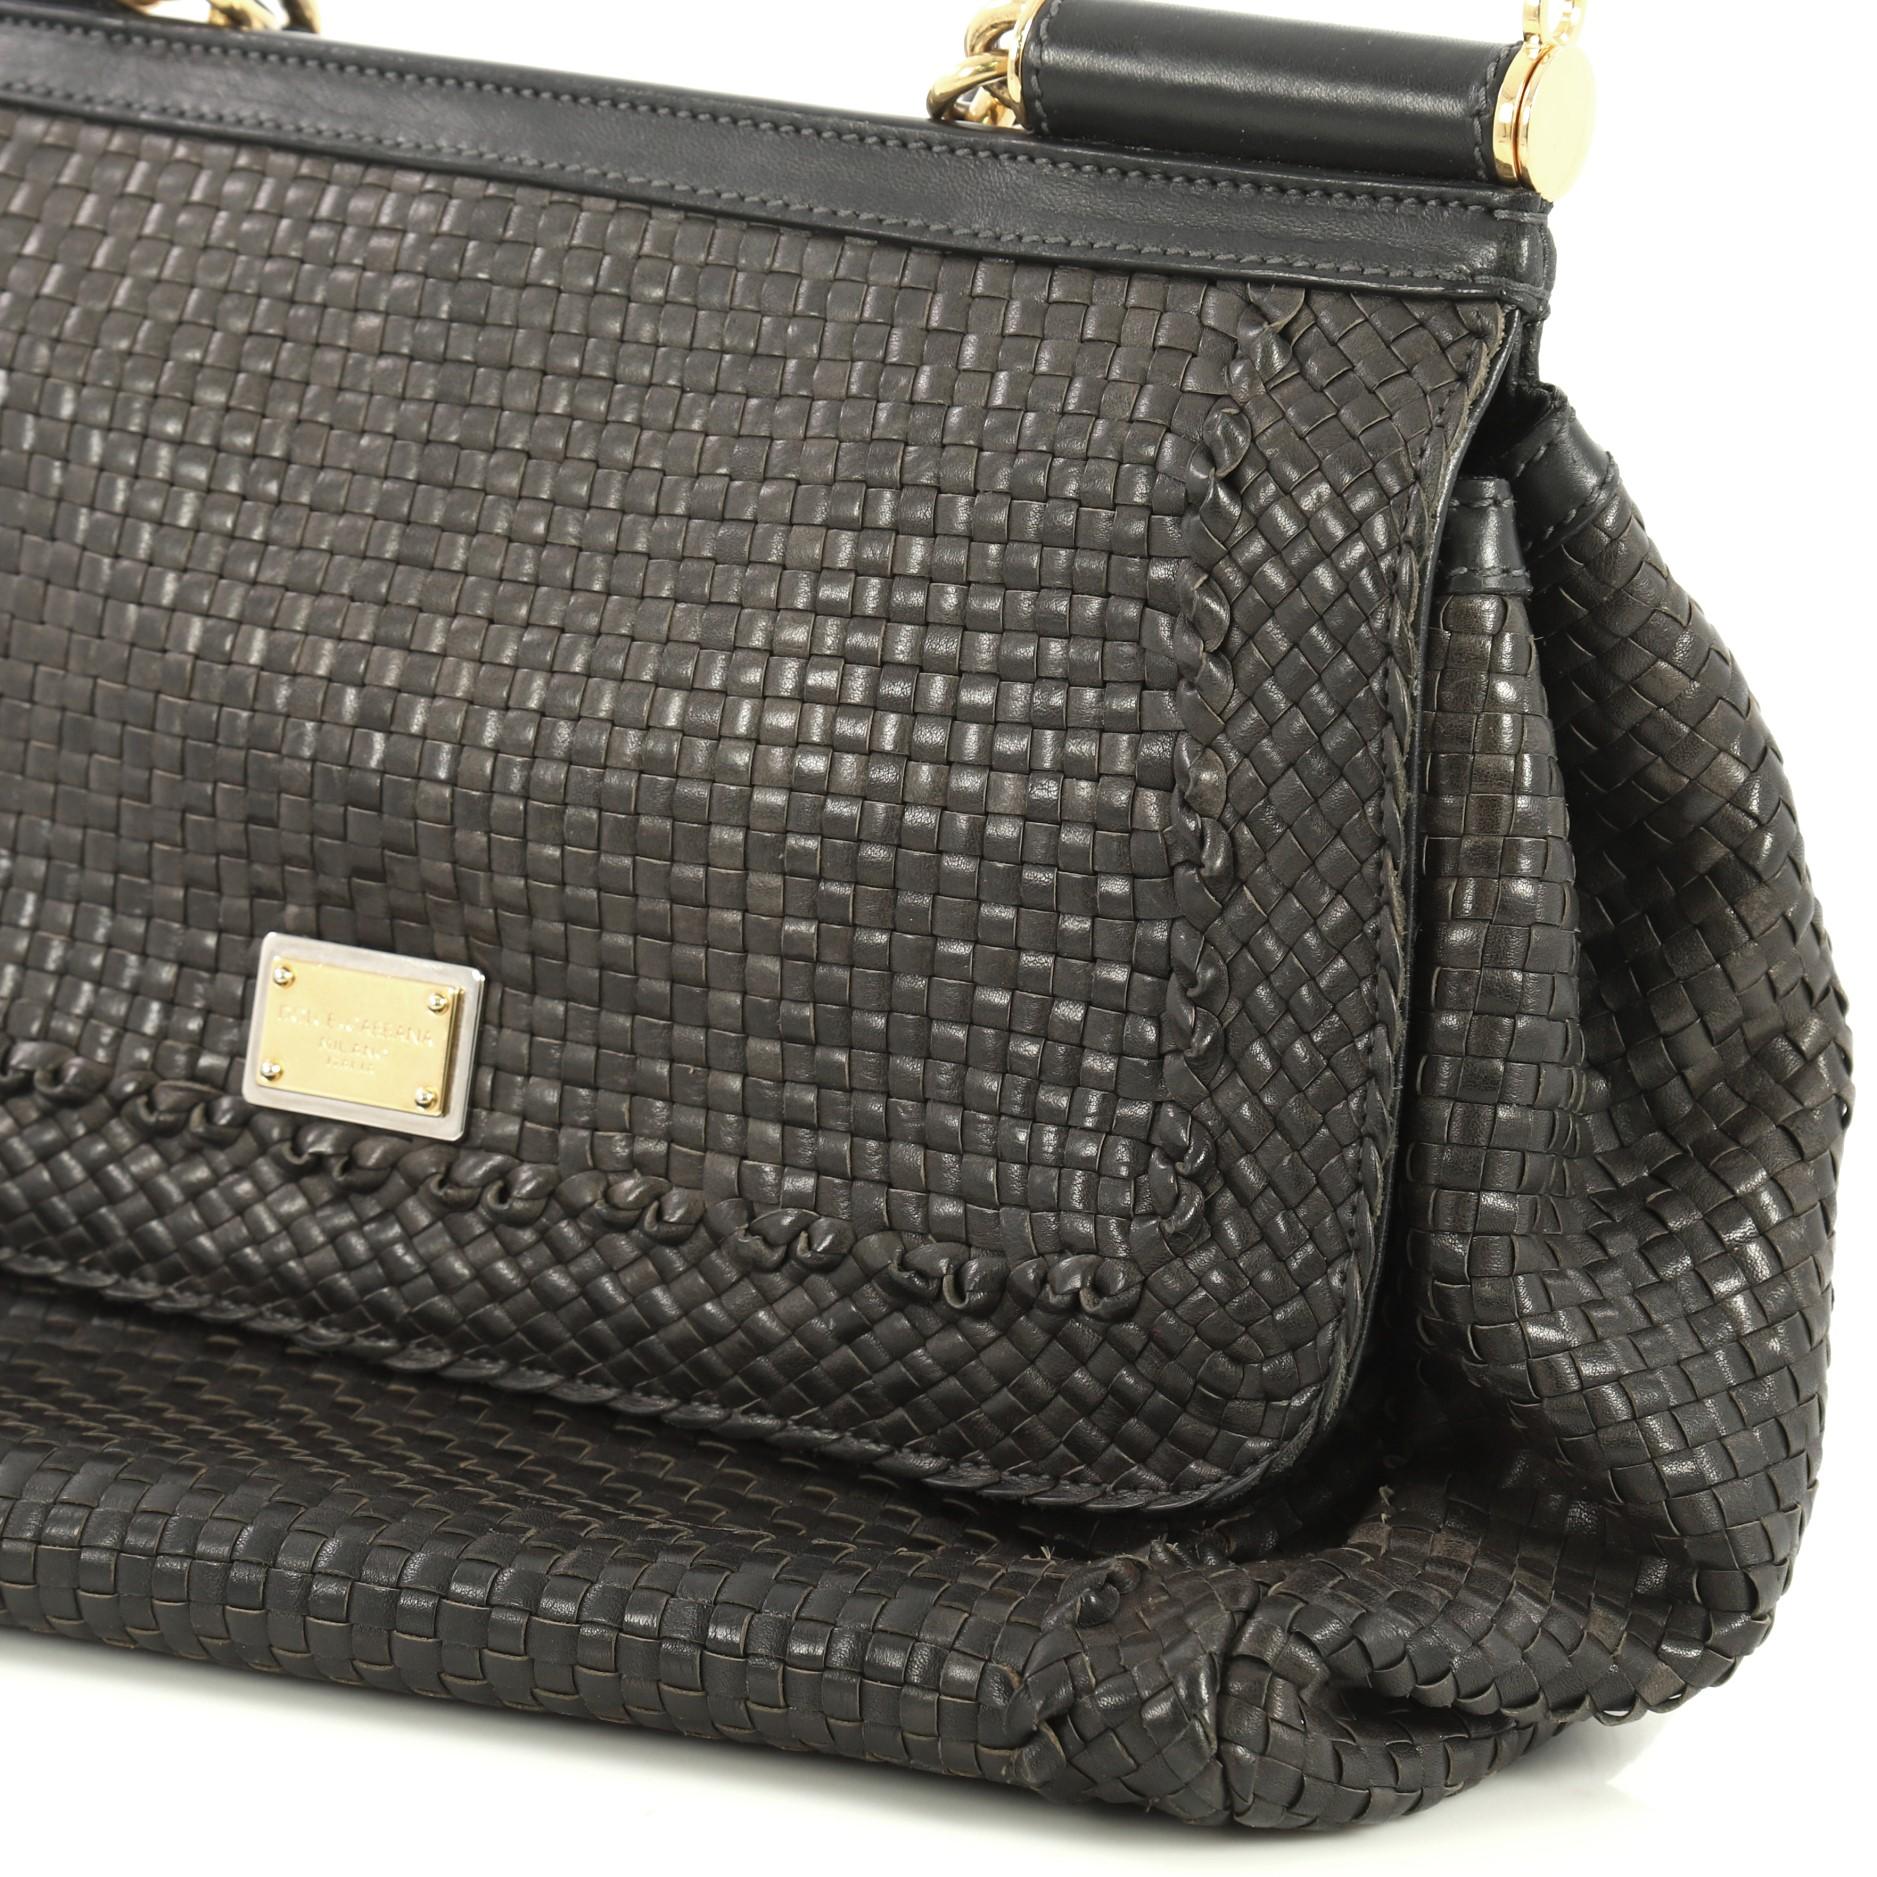 Women's Dolce & Gabbana Miss Sicily Bag Woven Leather Large